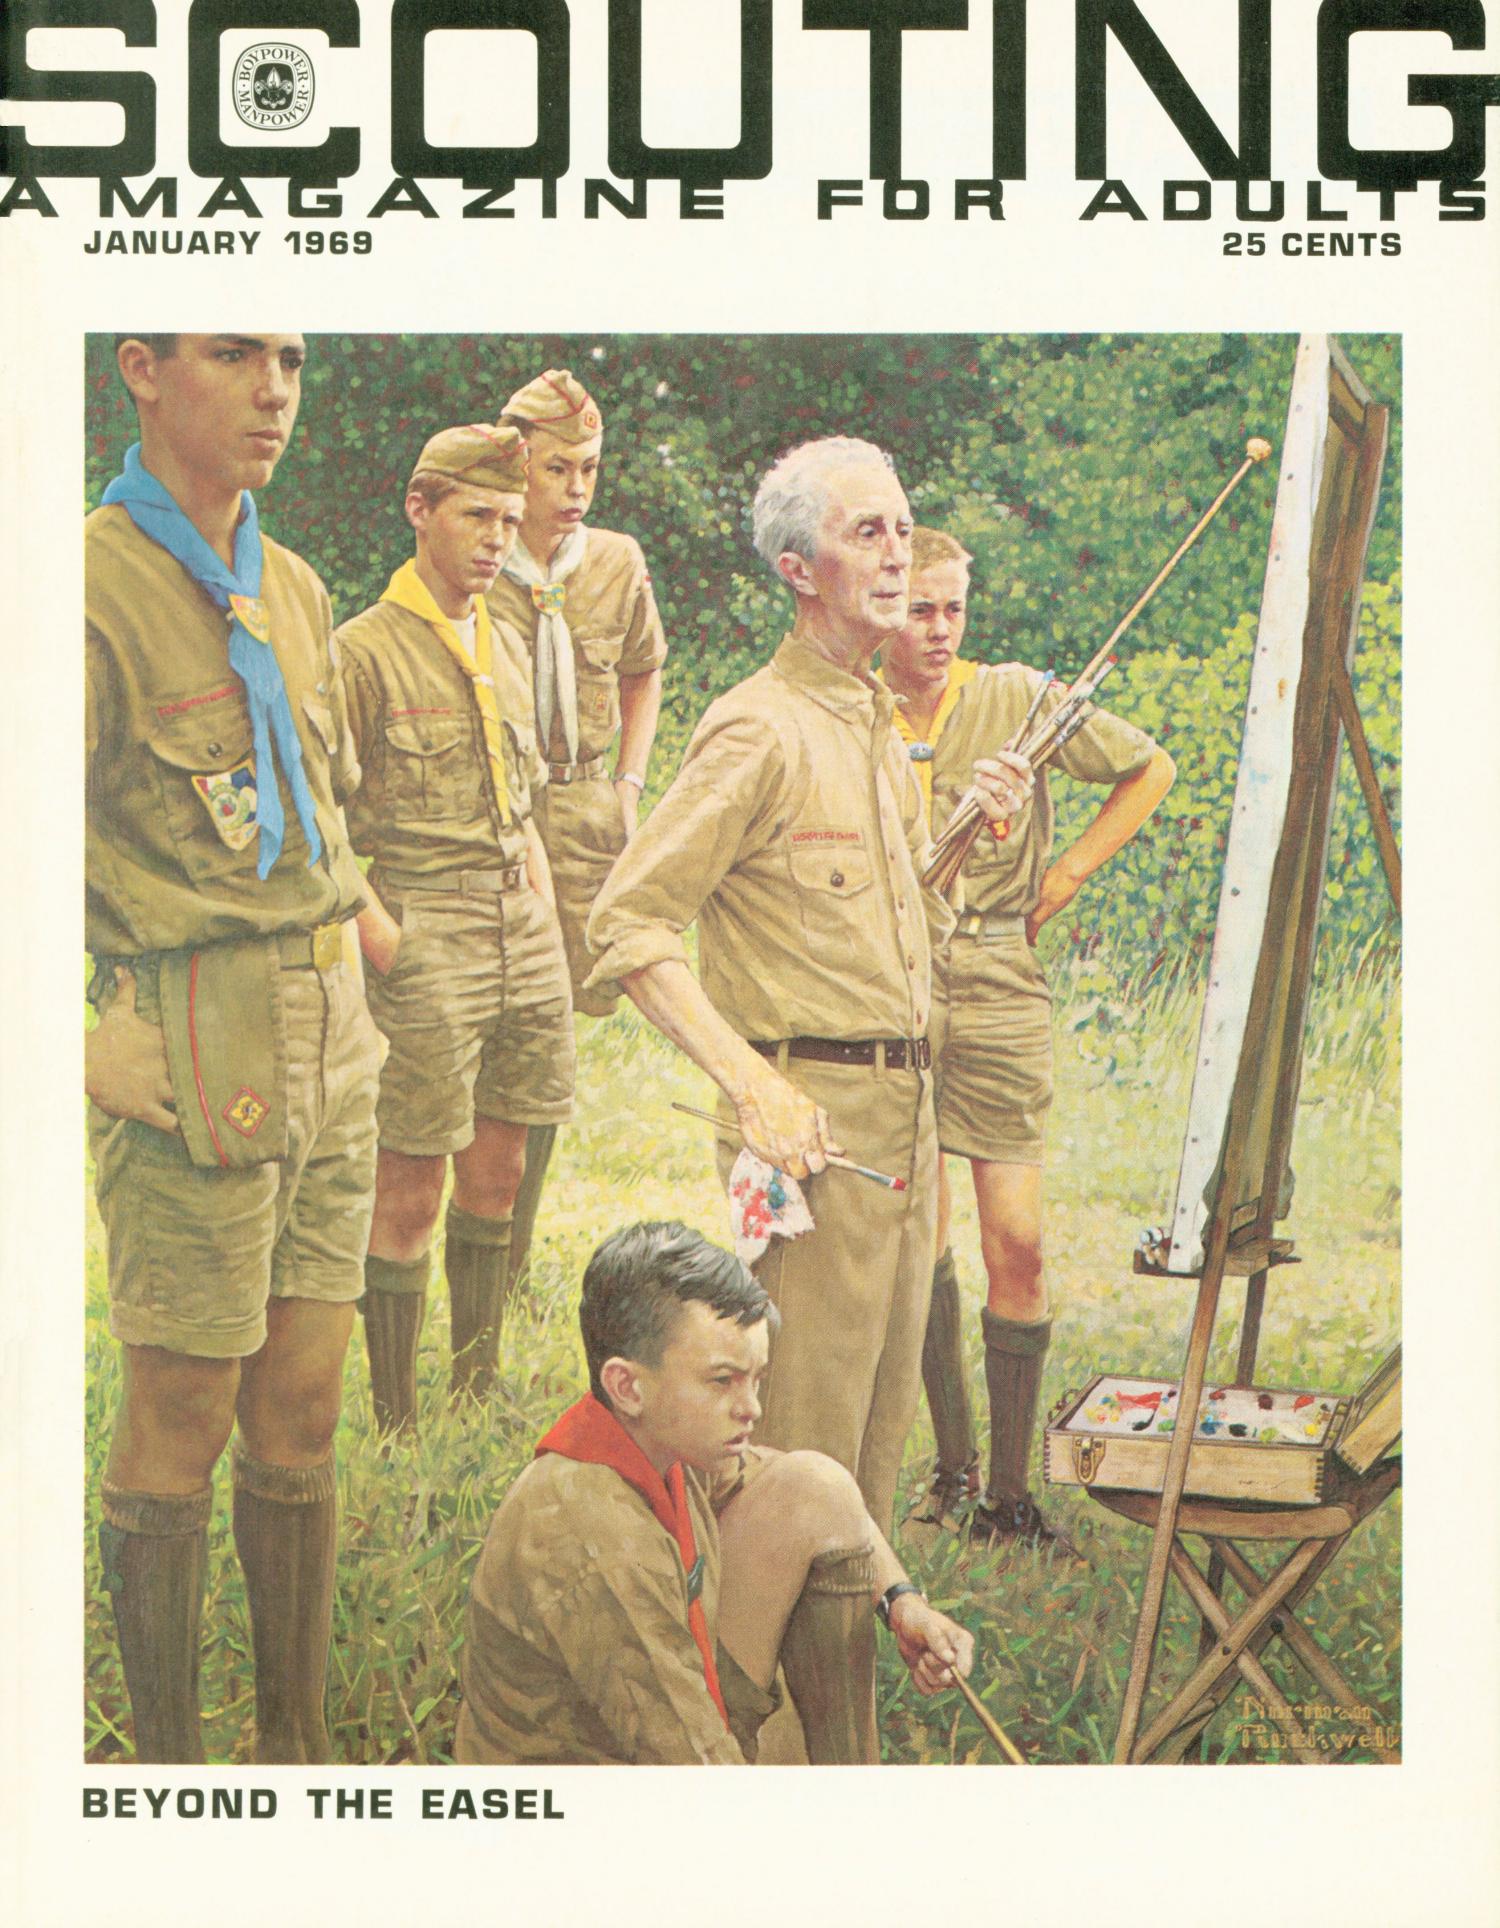 Scouting, Volume 57, Number 1, January 1969
                                                
                                                    Front Cover
                                                